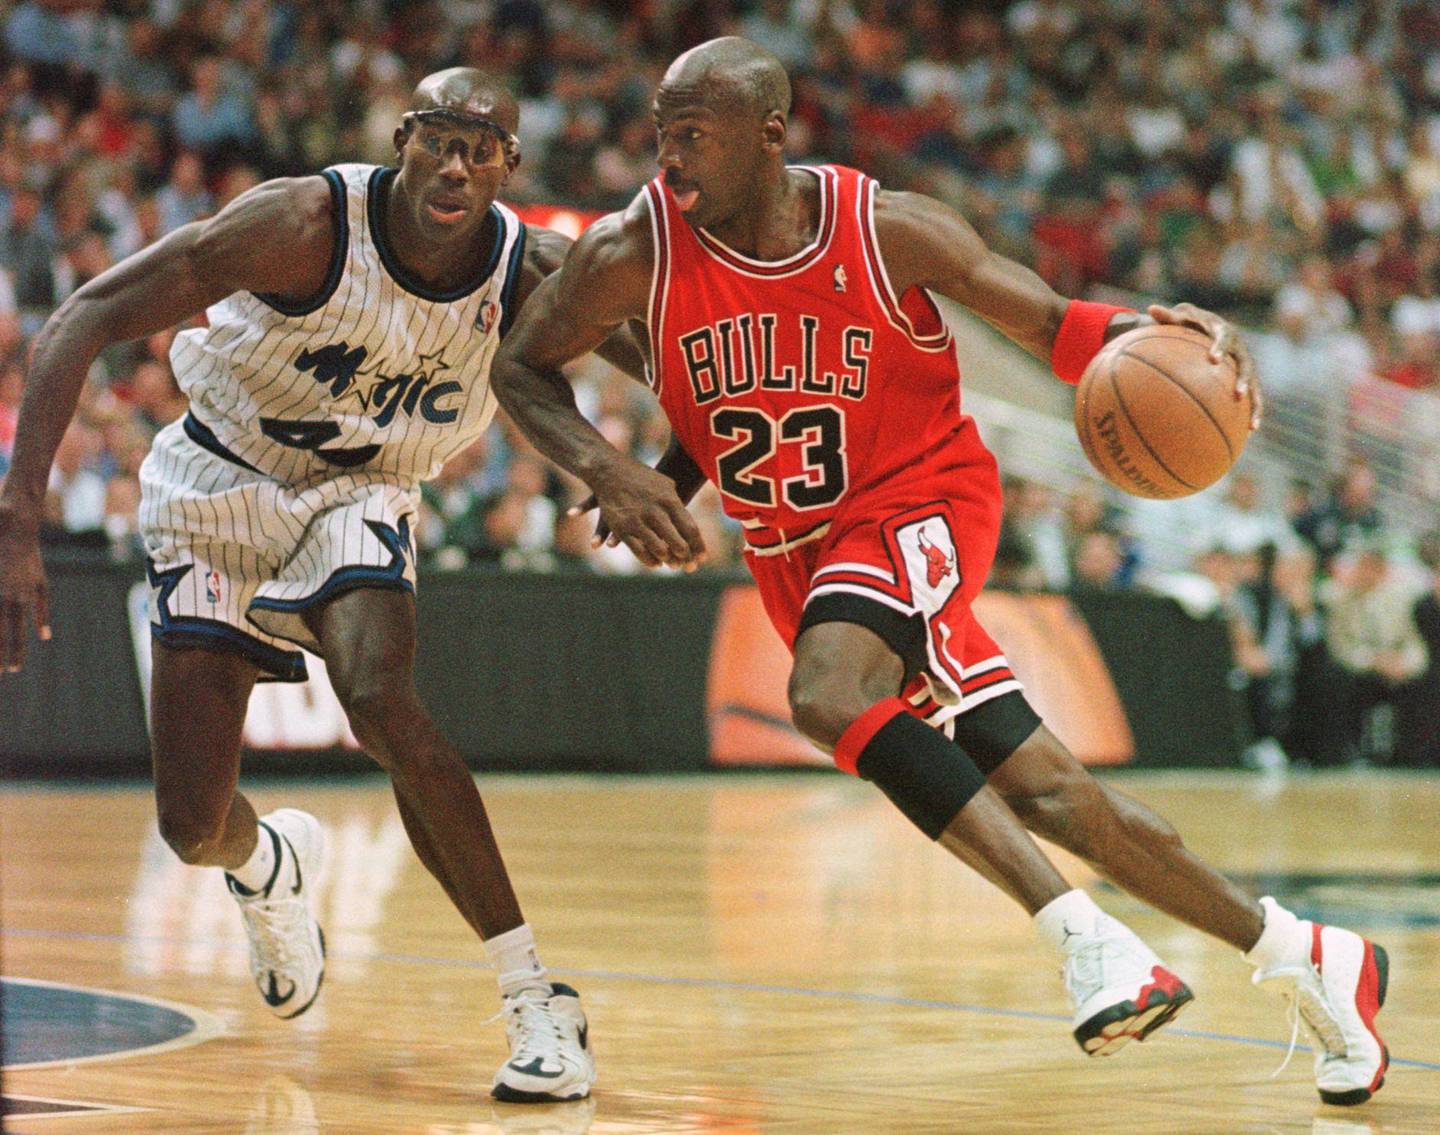 
Chicago Bulls guard Michael Jordan drives past Orlando Magic forward Charles Outlaw for two points during the first period of the game at the Arena in Orlando, 25 March. AFP PHOTO TONY RANZE